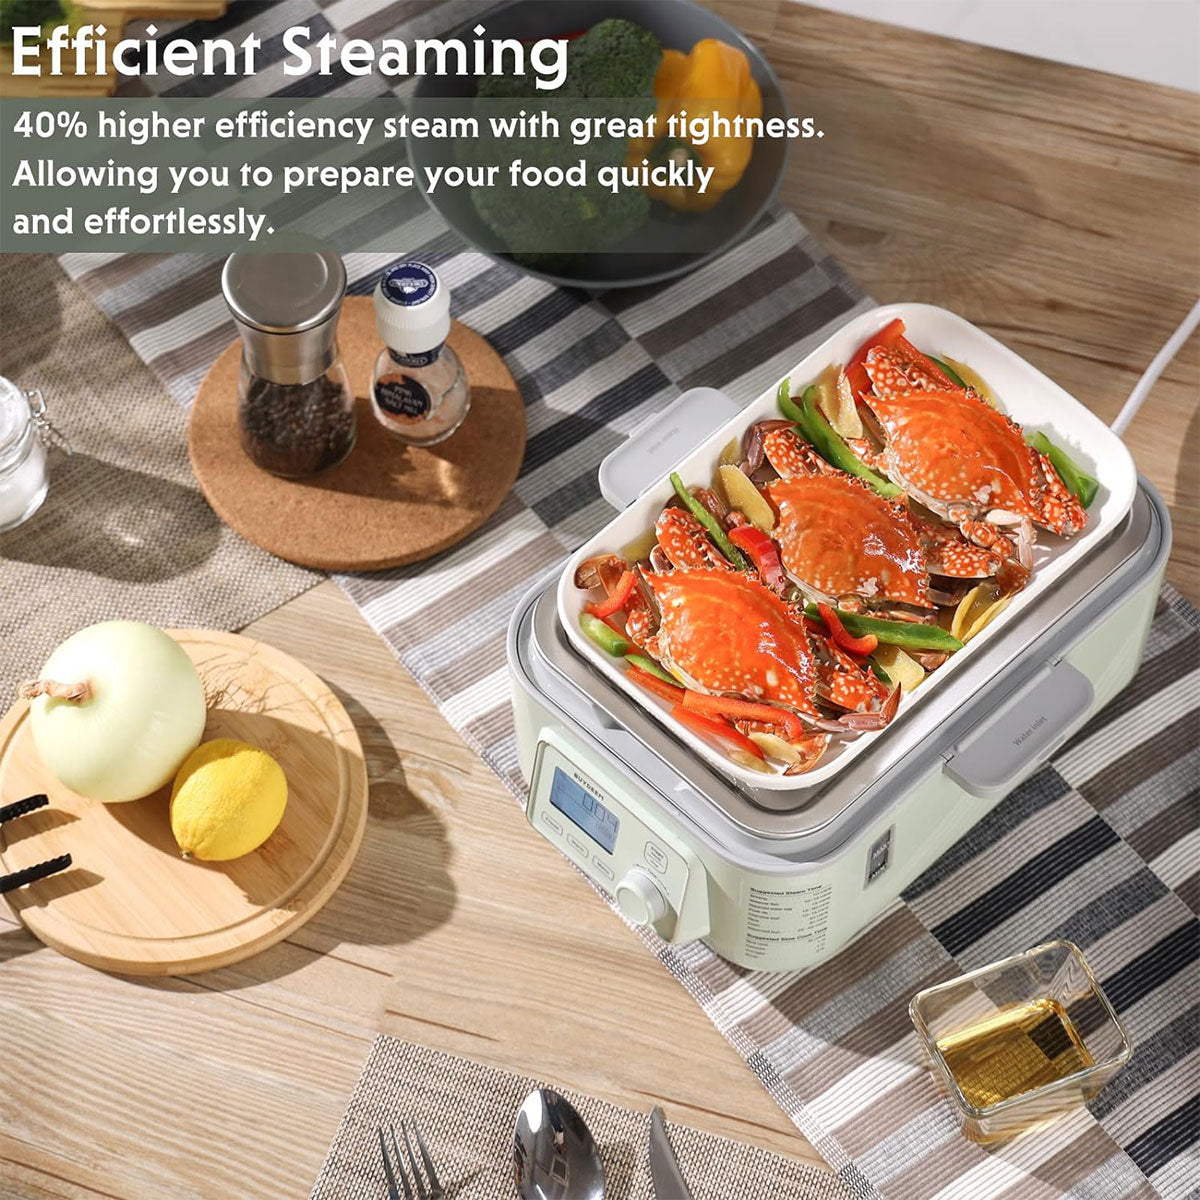 BUYDEEM 5L Electric One Touch Digital Multifunctional Food Steamer